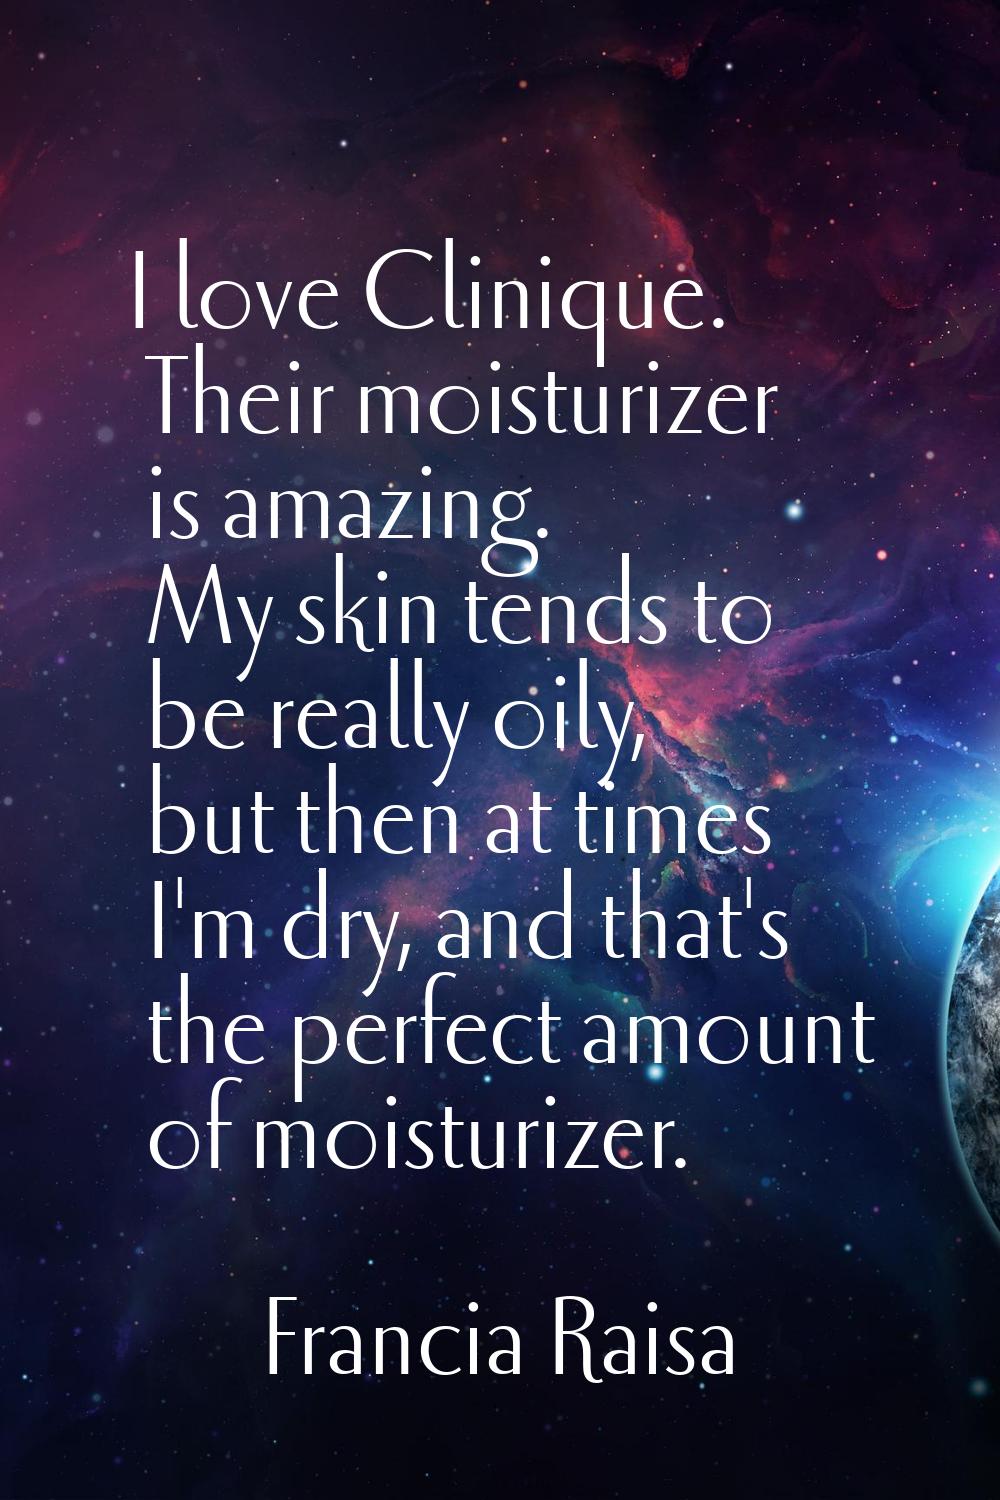 I love Clinique. Their moisturizer is amazing. My skin tends to be really oily, but then at times I